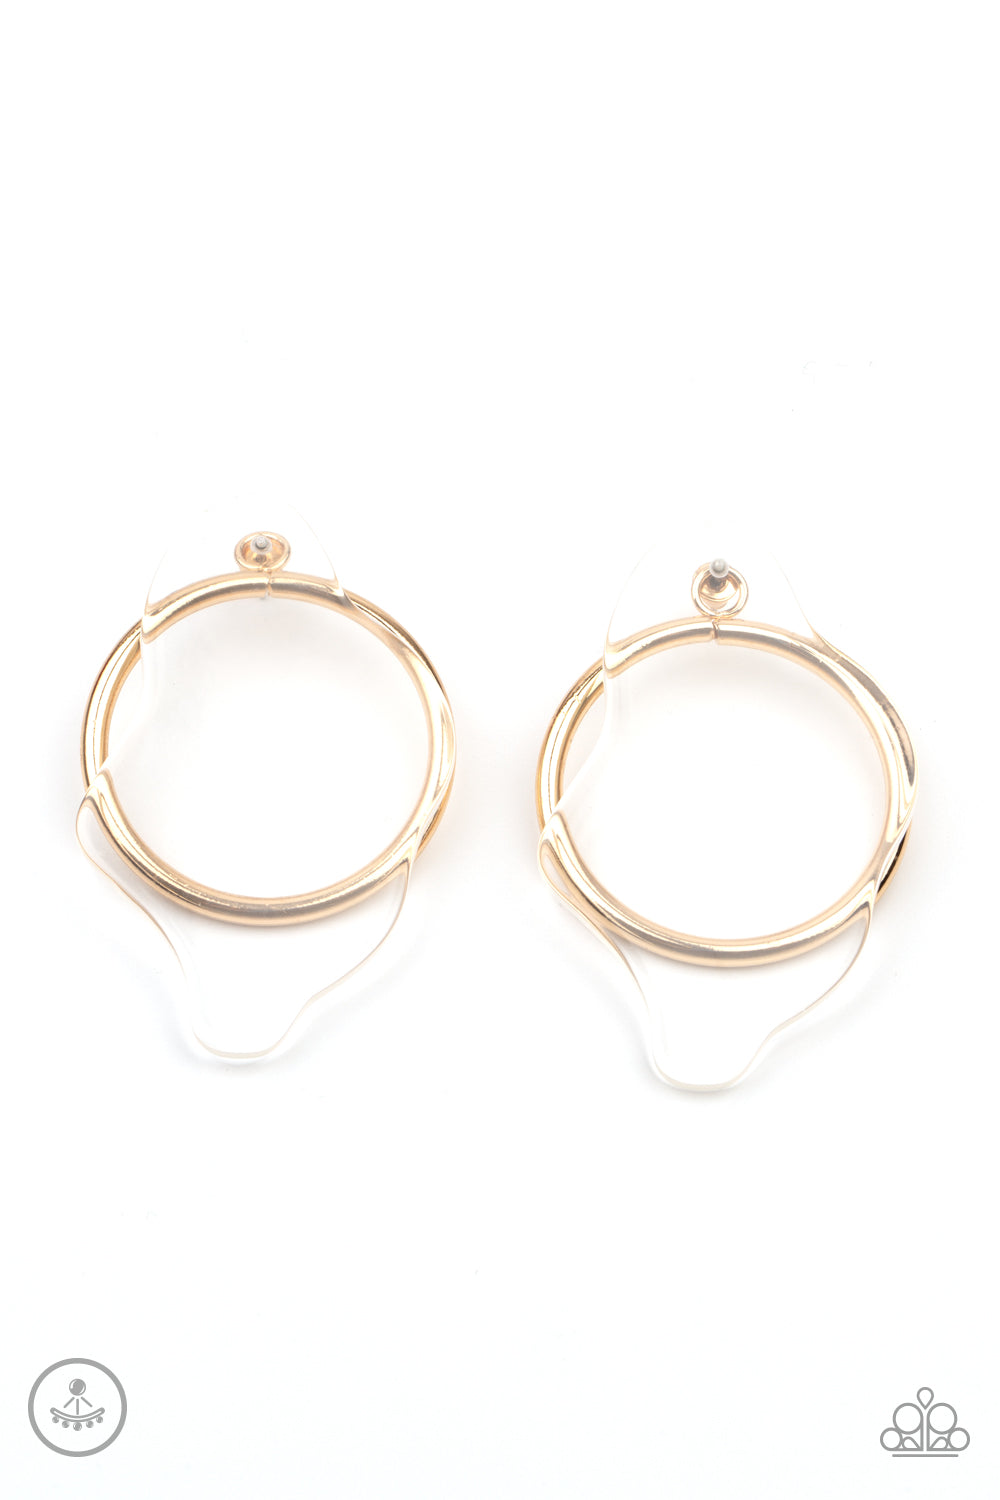 Paparazzi Clear The Way! - Gold Earrings - A Finishing Touch Jewelry